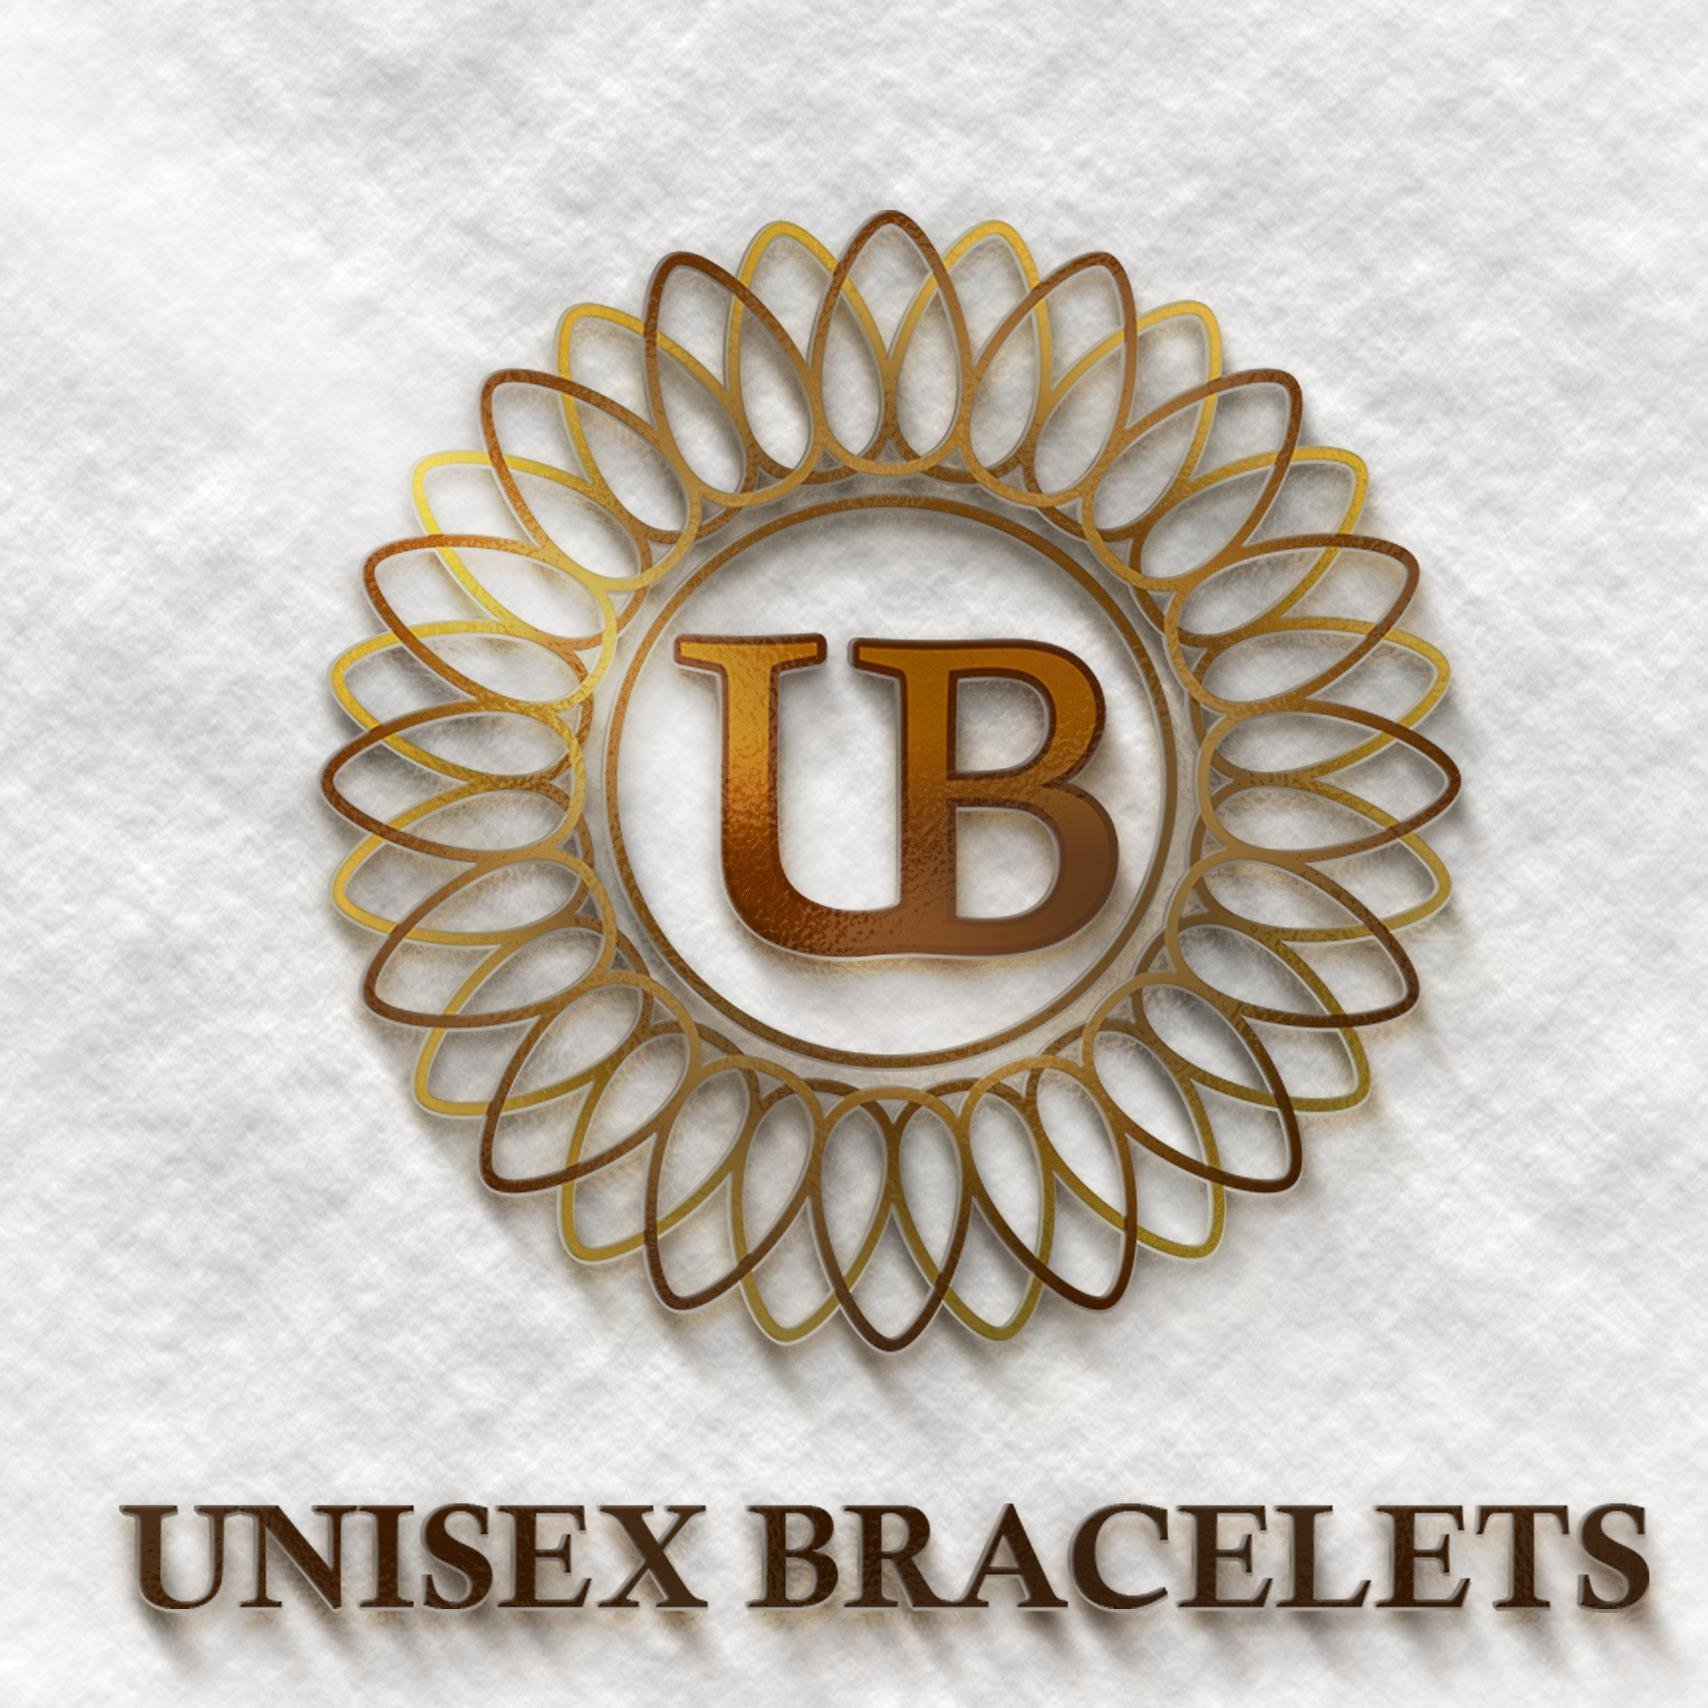 If you're looking for high quality unisex bracelets, there is none better than those at http://t.co/YTJCxExDM6.